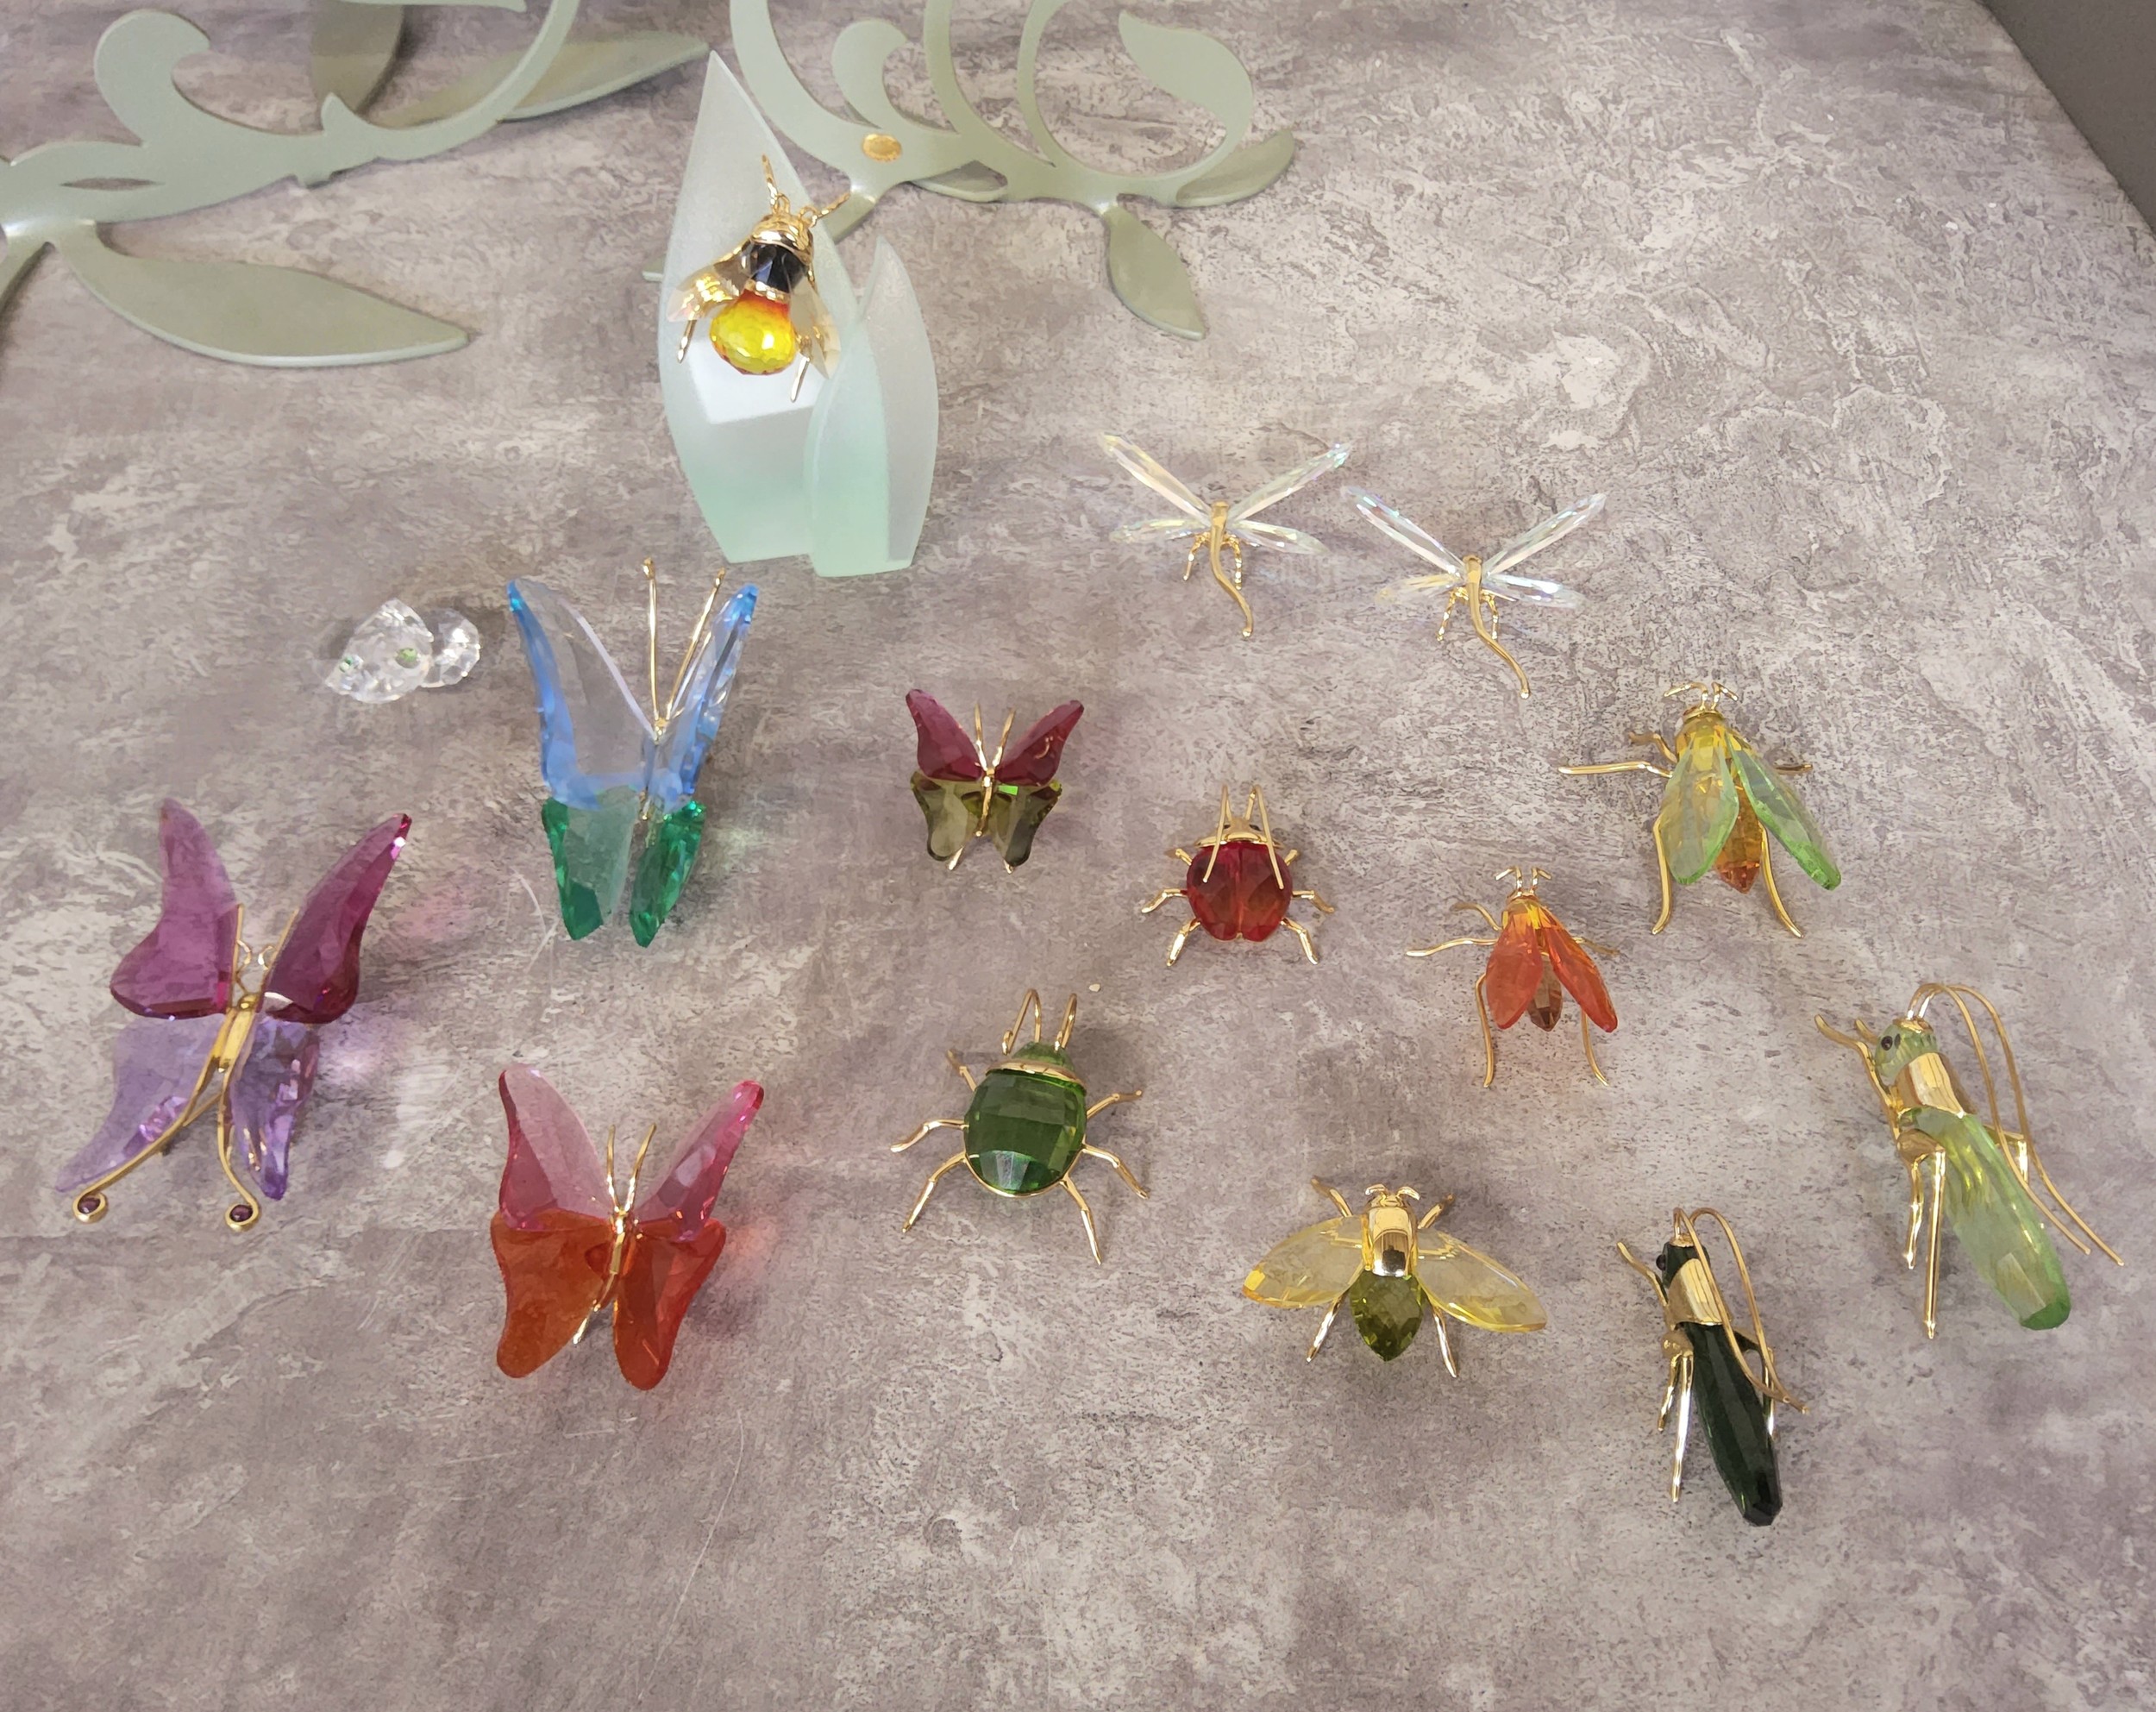 Daniel Swarovski Paradise collection including gold plated sterling silver crickets, dragonflies, - Image 3 of 6